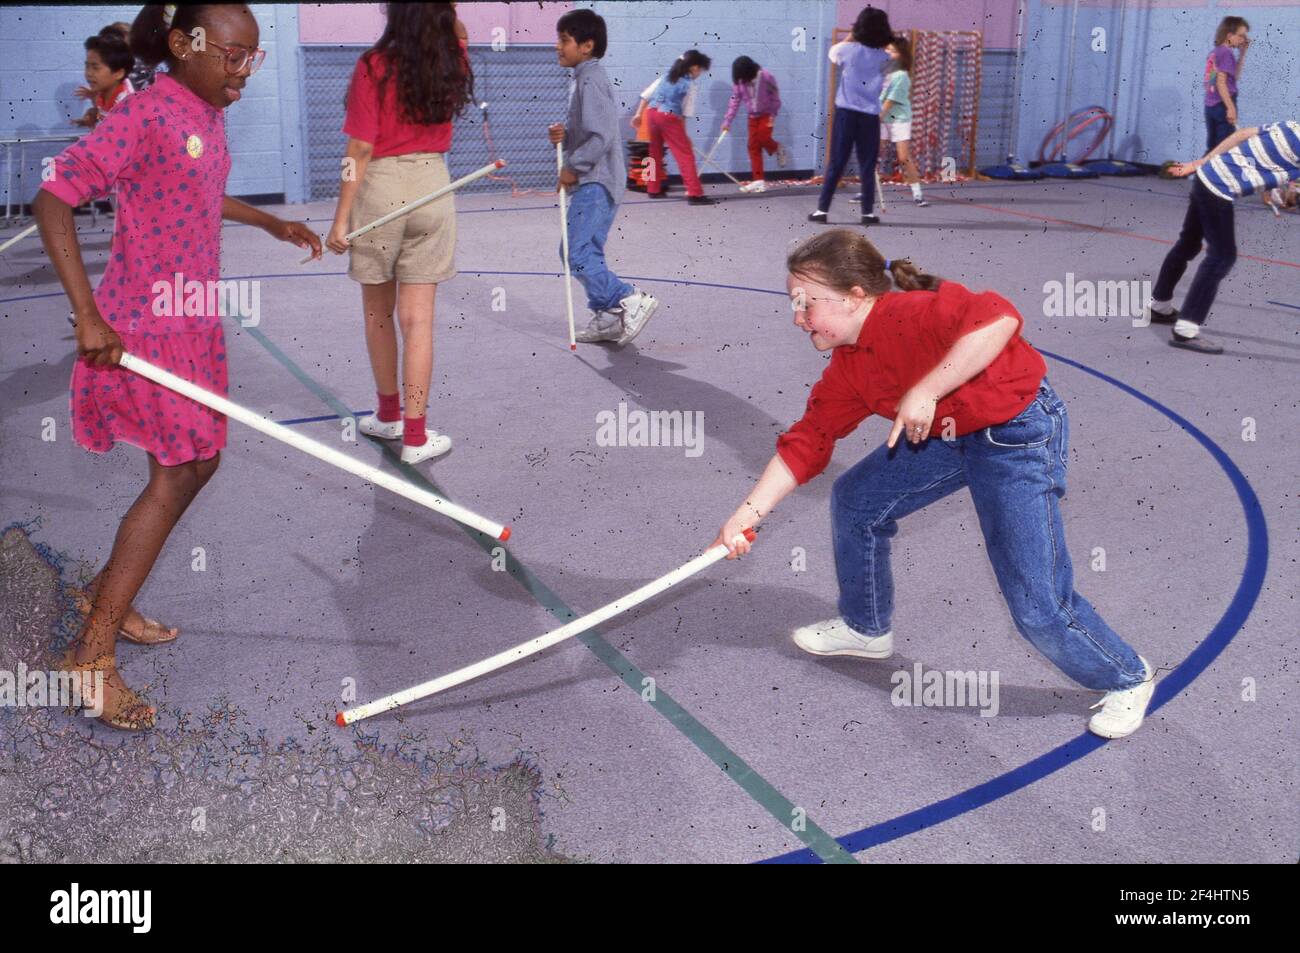 Cooperative Education: 'Toe Fencing' in physical education class, Walnut Creek Elementary School, 1992 Stock Photo